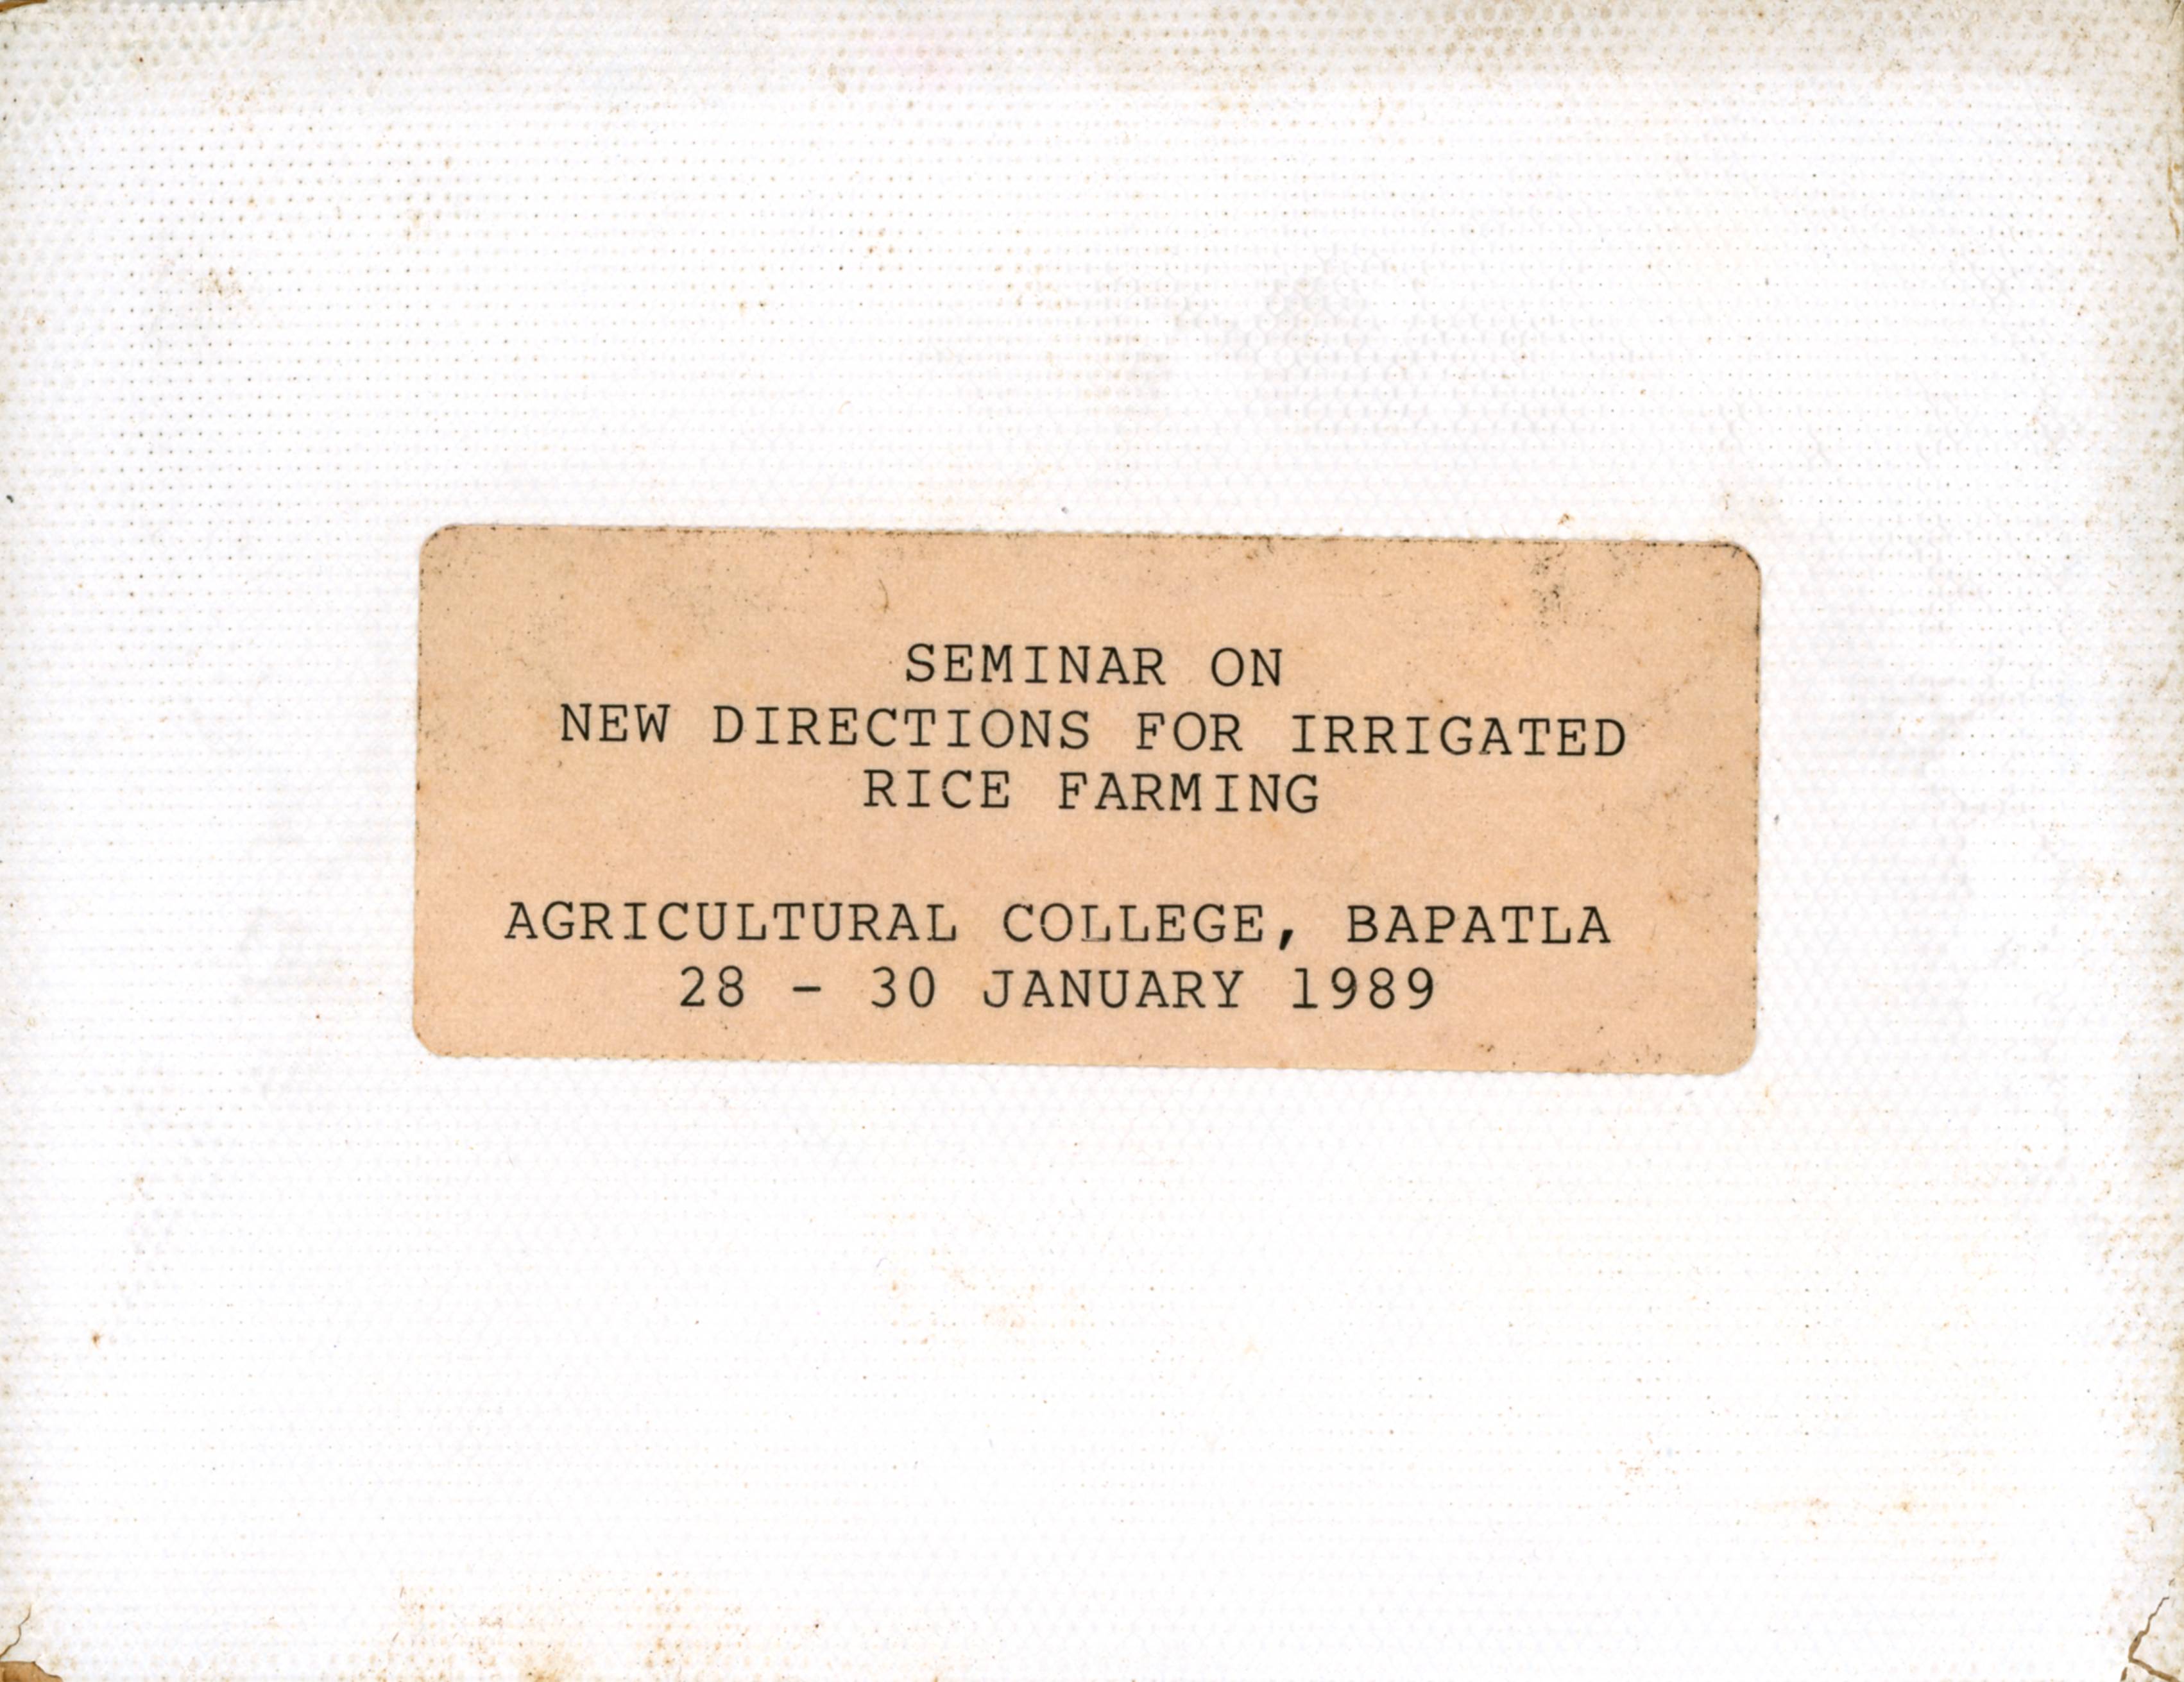 Seminar on new directions for irrigated rice farming